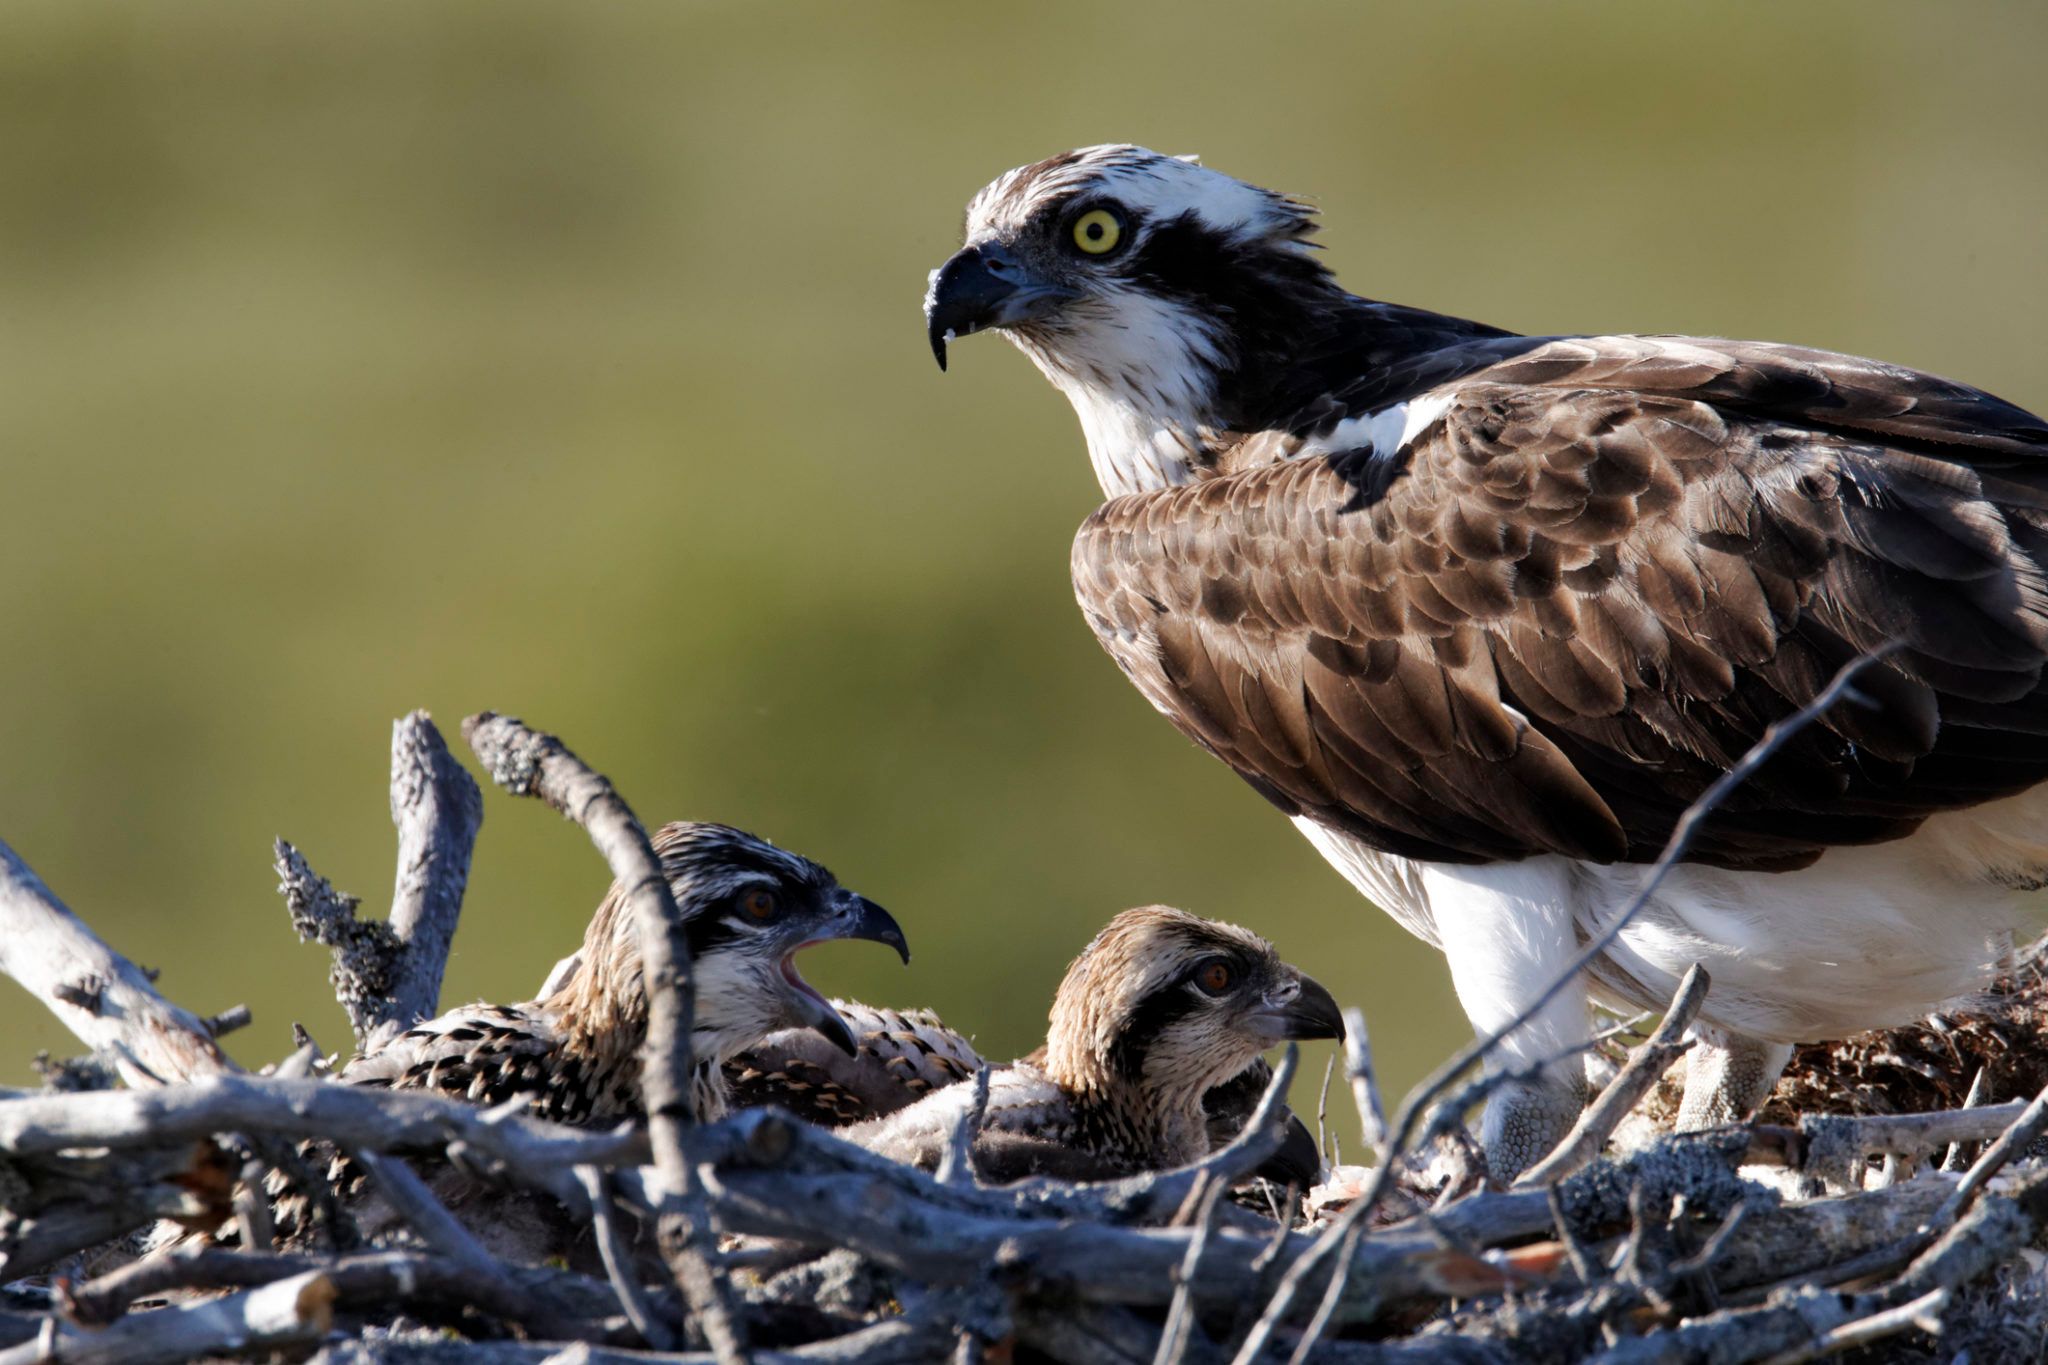 Ospreys to be reintroduced to Irish skies this summer